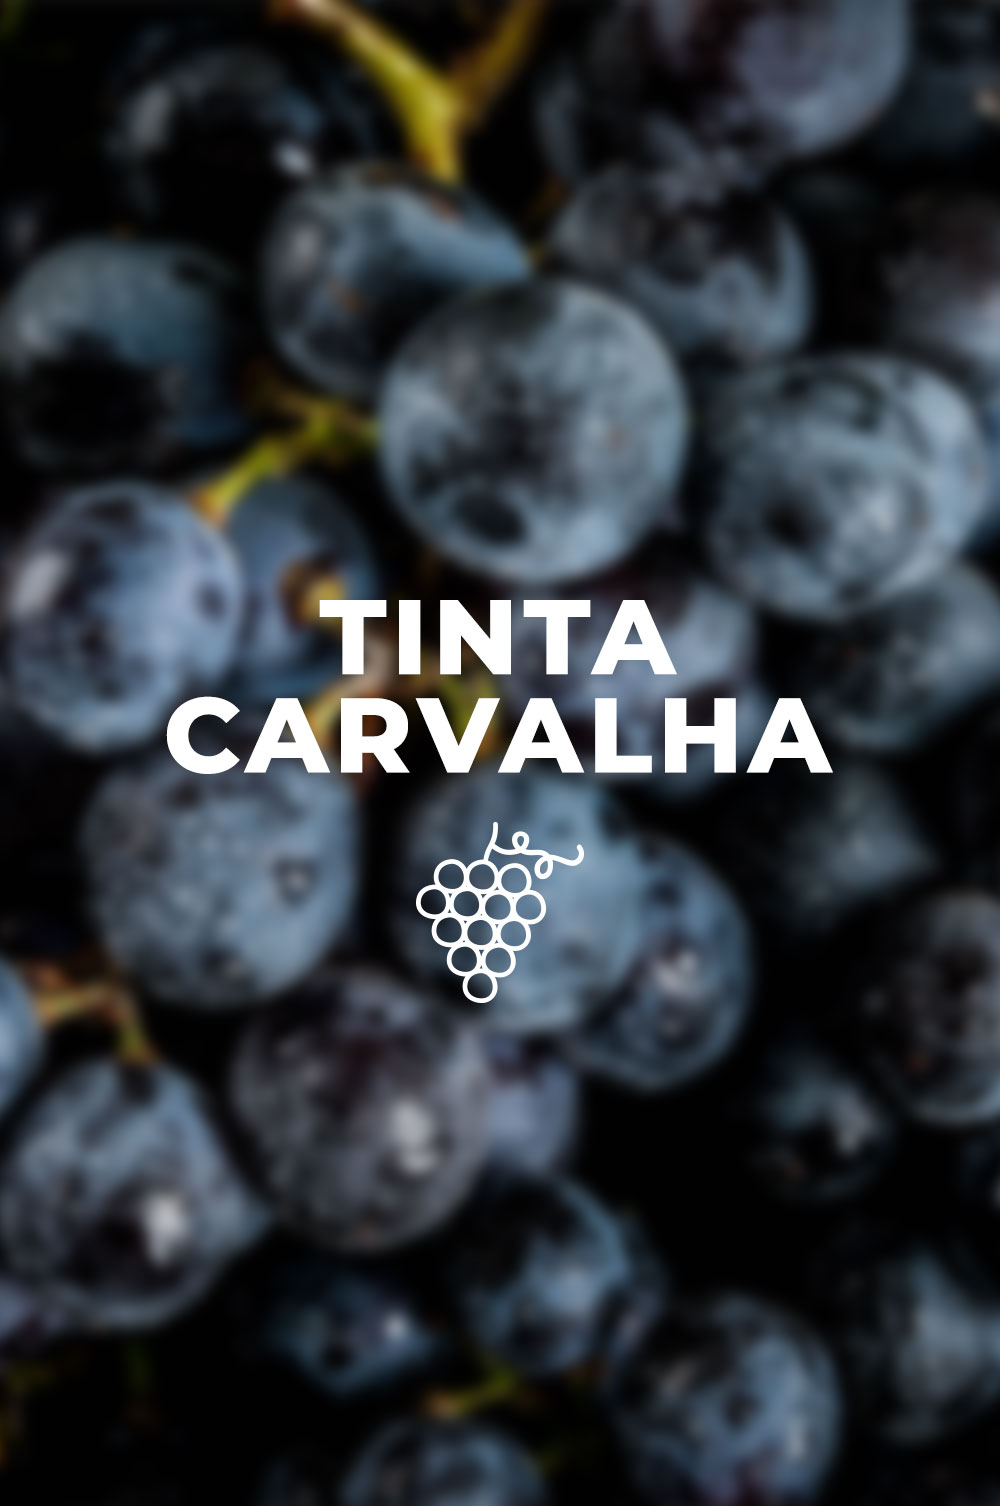 A toast to Tinta Carvalha, with a wine from António Maçanita